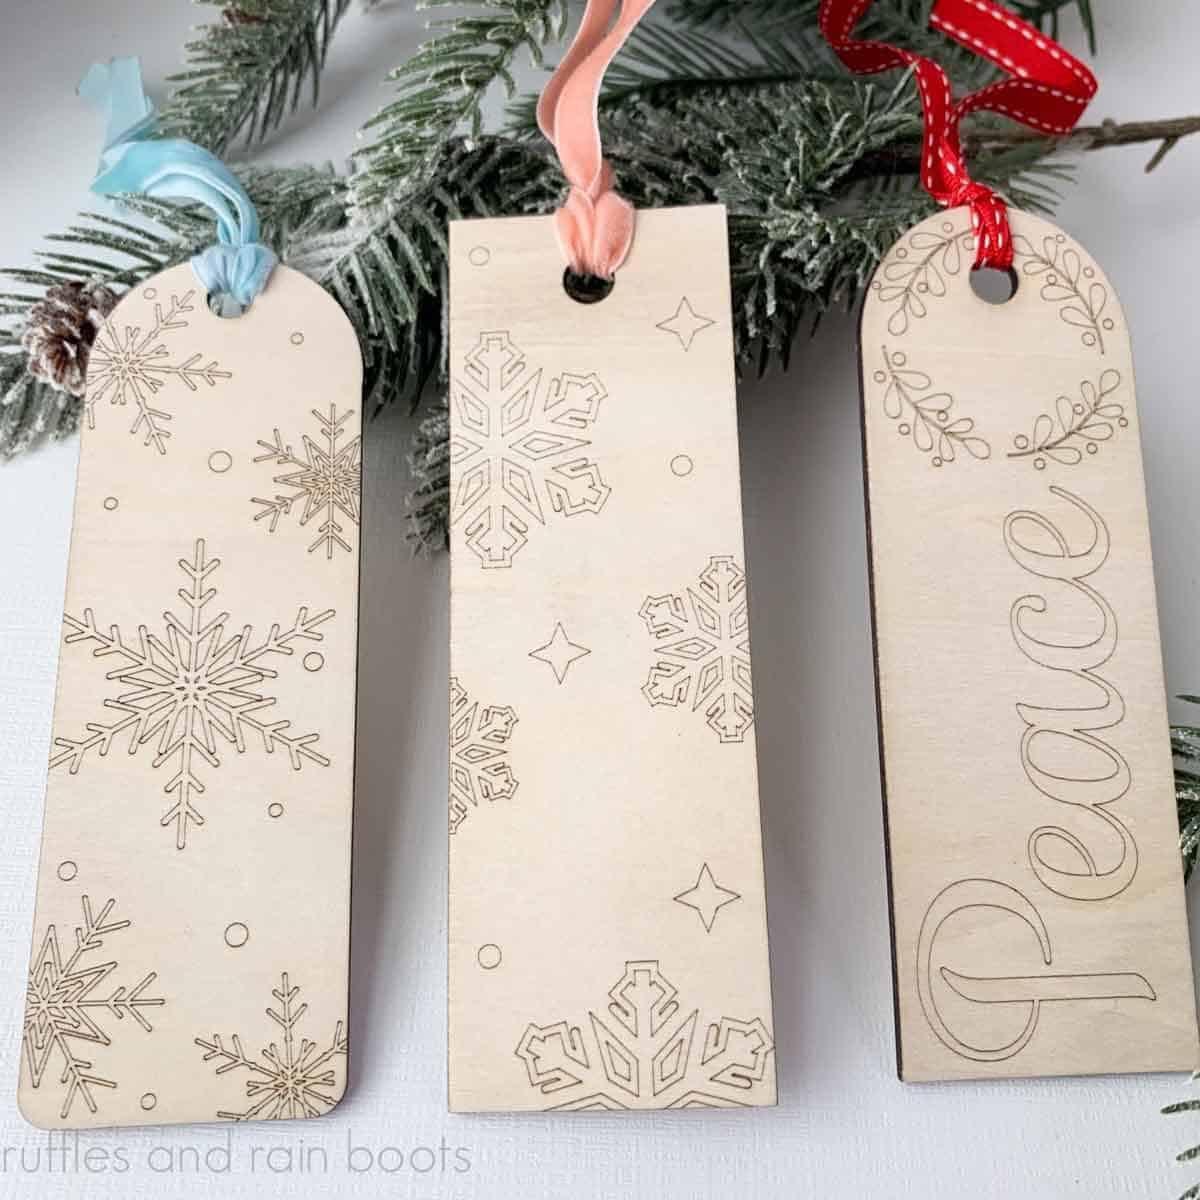 Close up square image of three scored bookmarks with Christmas themes on white background with pine branches.